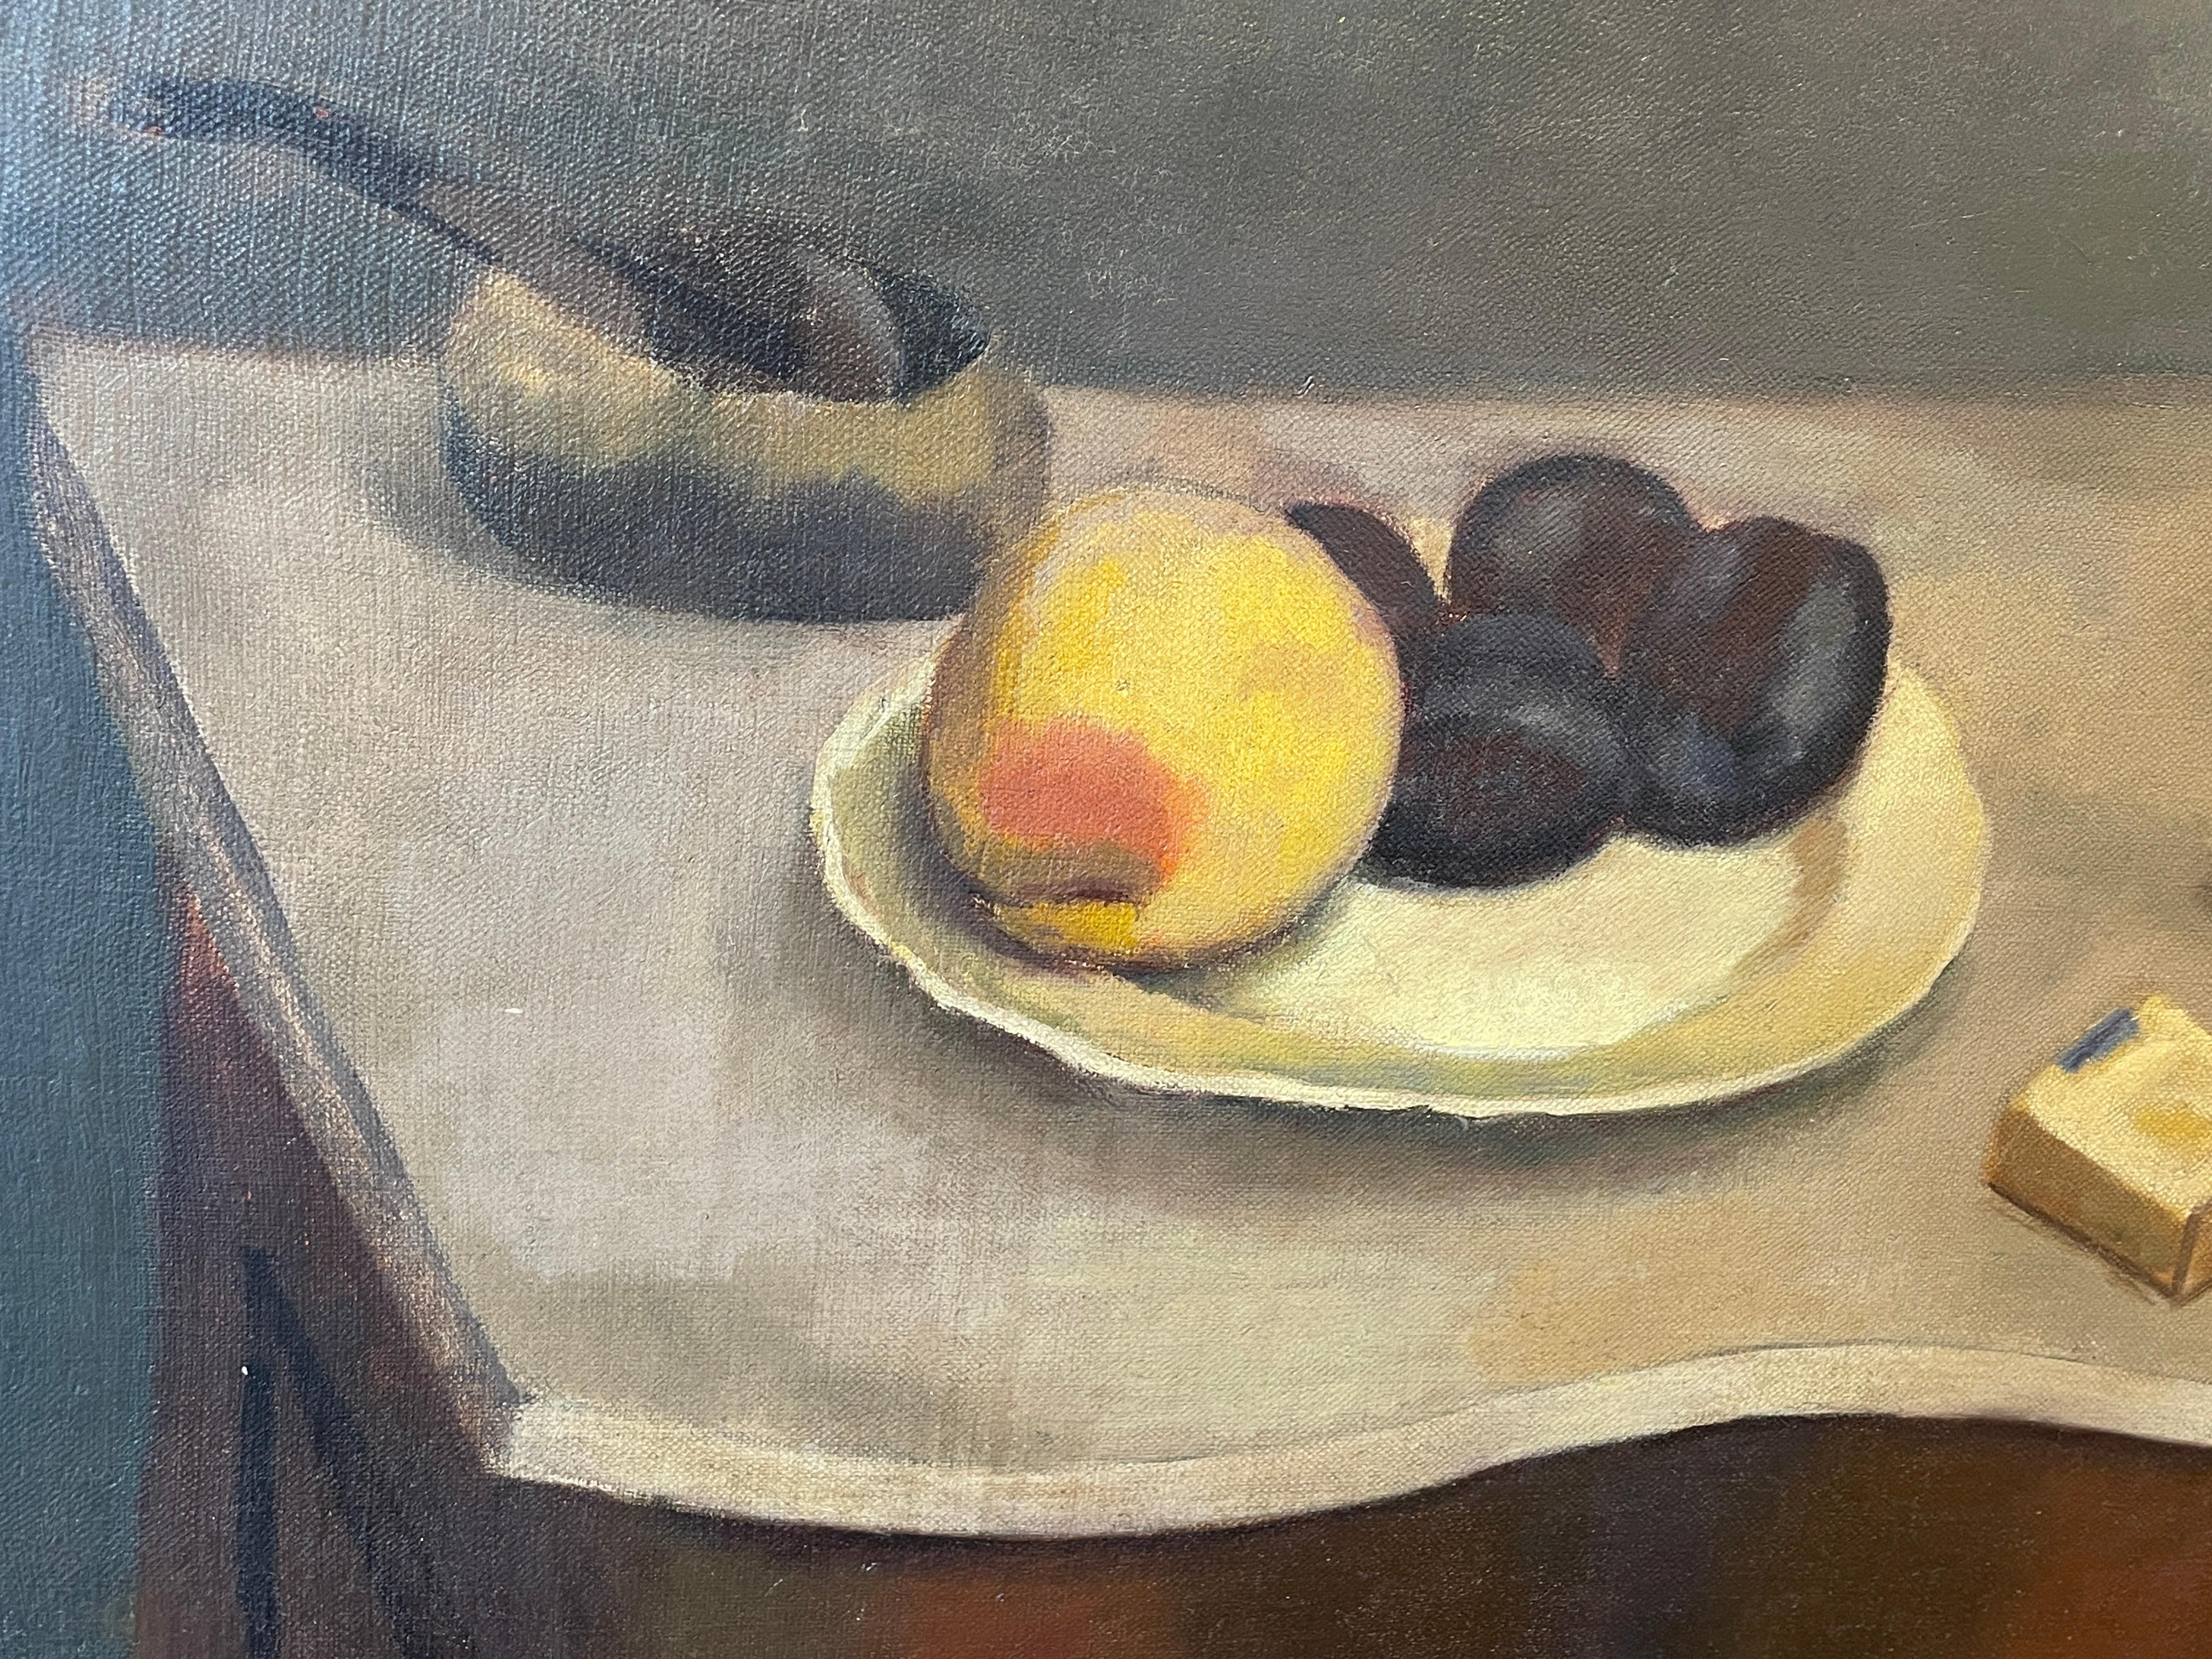 Albert Swinden (1901 - 1961)
Still Life of Fruit, 1937
Oil on canvas
18 x 30 inches

Provenance:
Graham Gallery, New York

Albert Swinden (1901–1961) was an English-born American abstract painter. He was one of the founders of the American Abstract